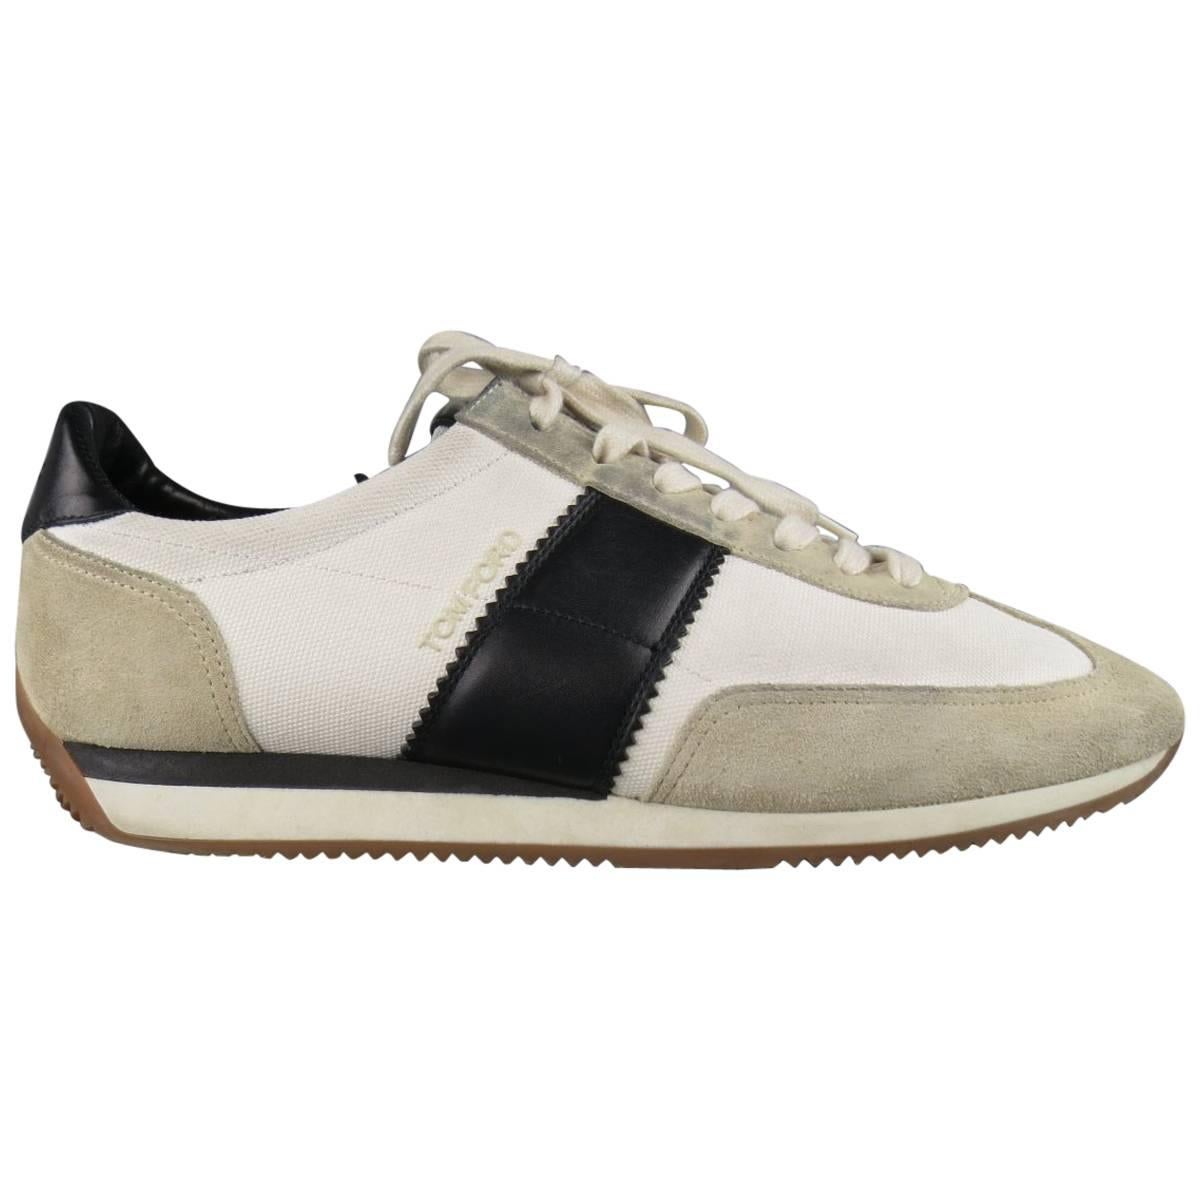 TOM FORD Size 11 White & Black Two Toned Suede & Canvas Orford Sneakers